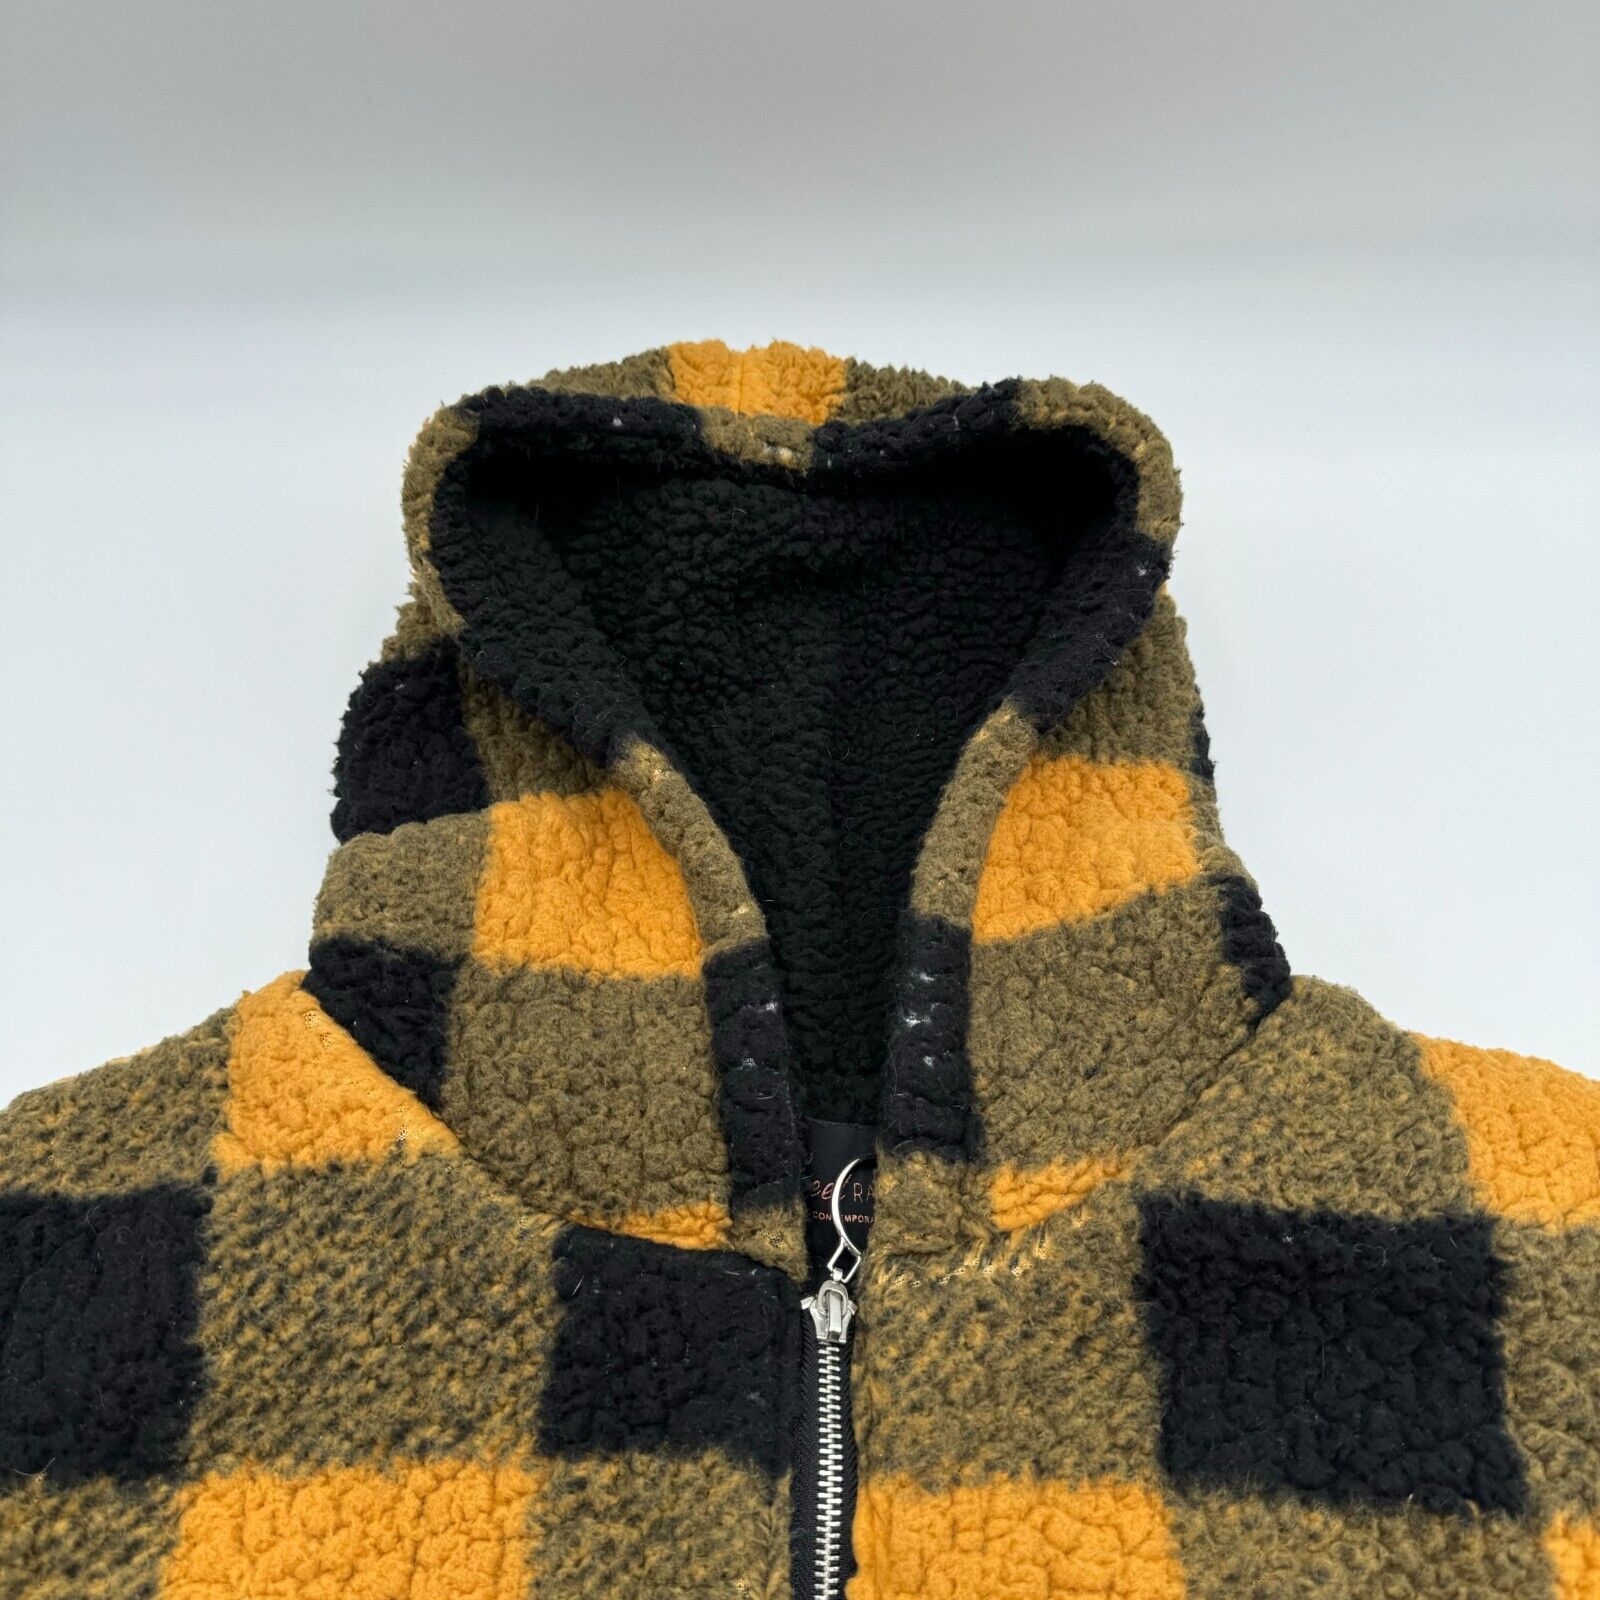 Sweet Rain Yellow Plaid Young Contemporary Sherpa Zip Up Jacket Womens Size L